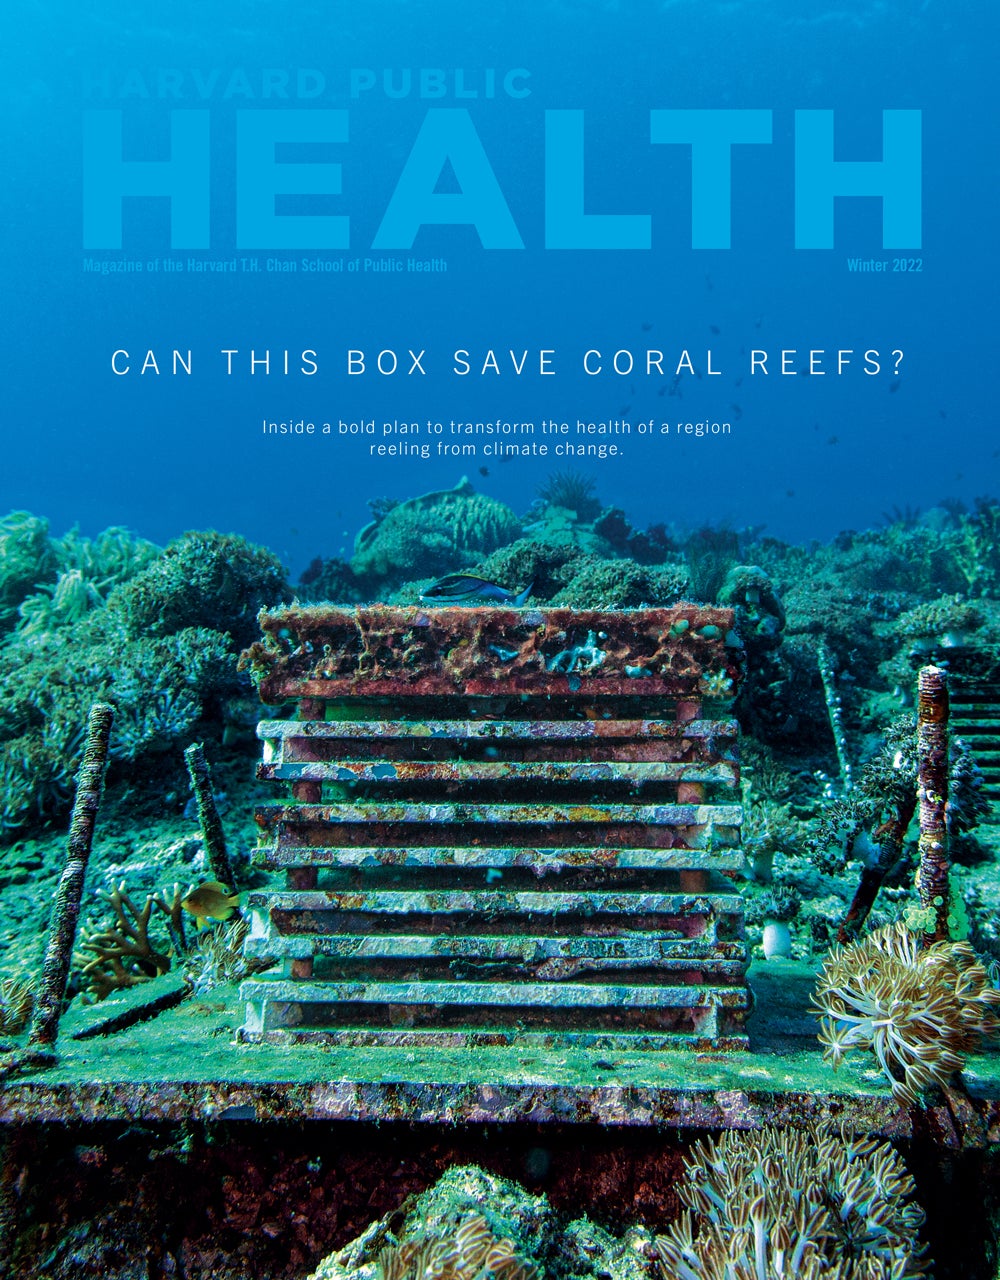 A photo of the ocean floor shows an autonomous reef structure surrounded by oceanic foliage and plants, fish and lichen. The cover line says "Can this box save coral reefs?"